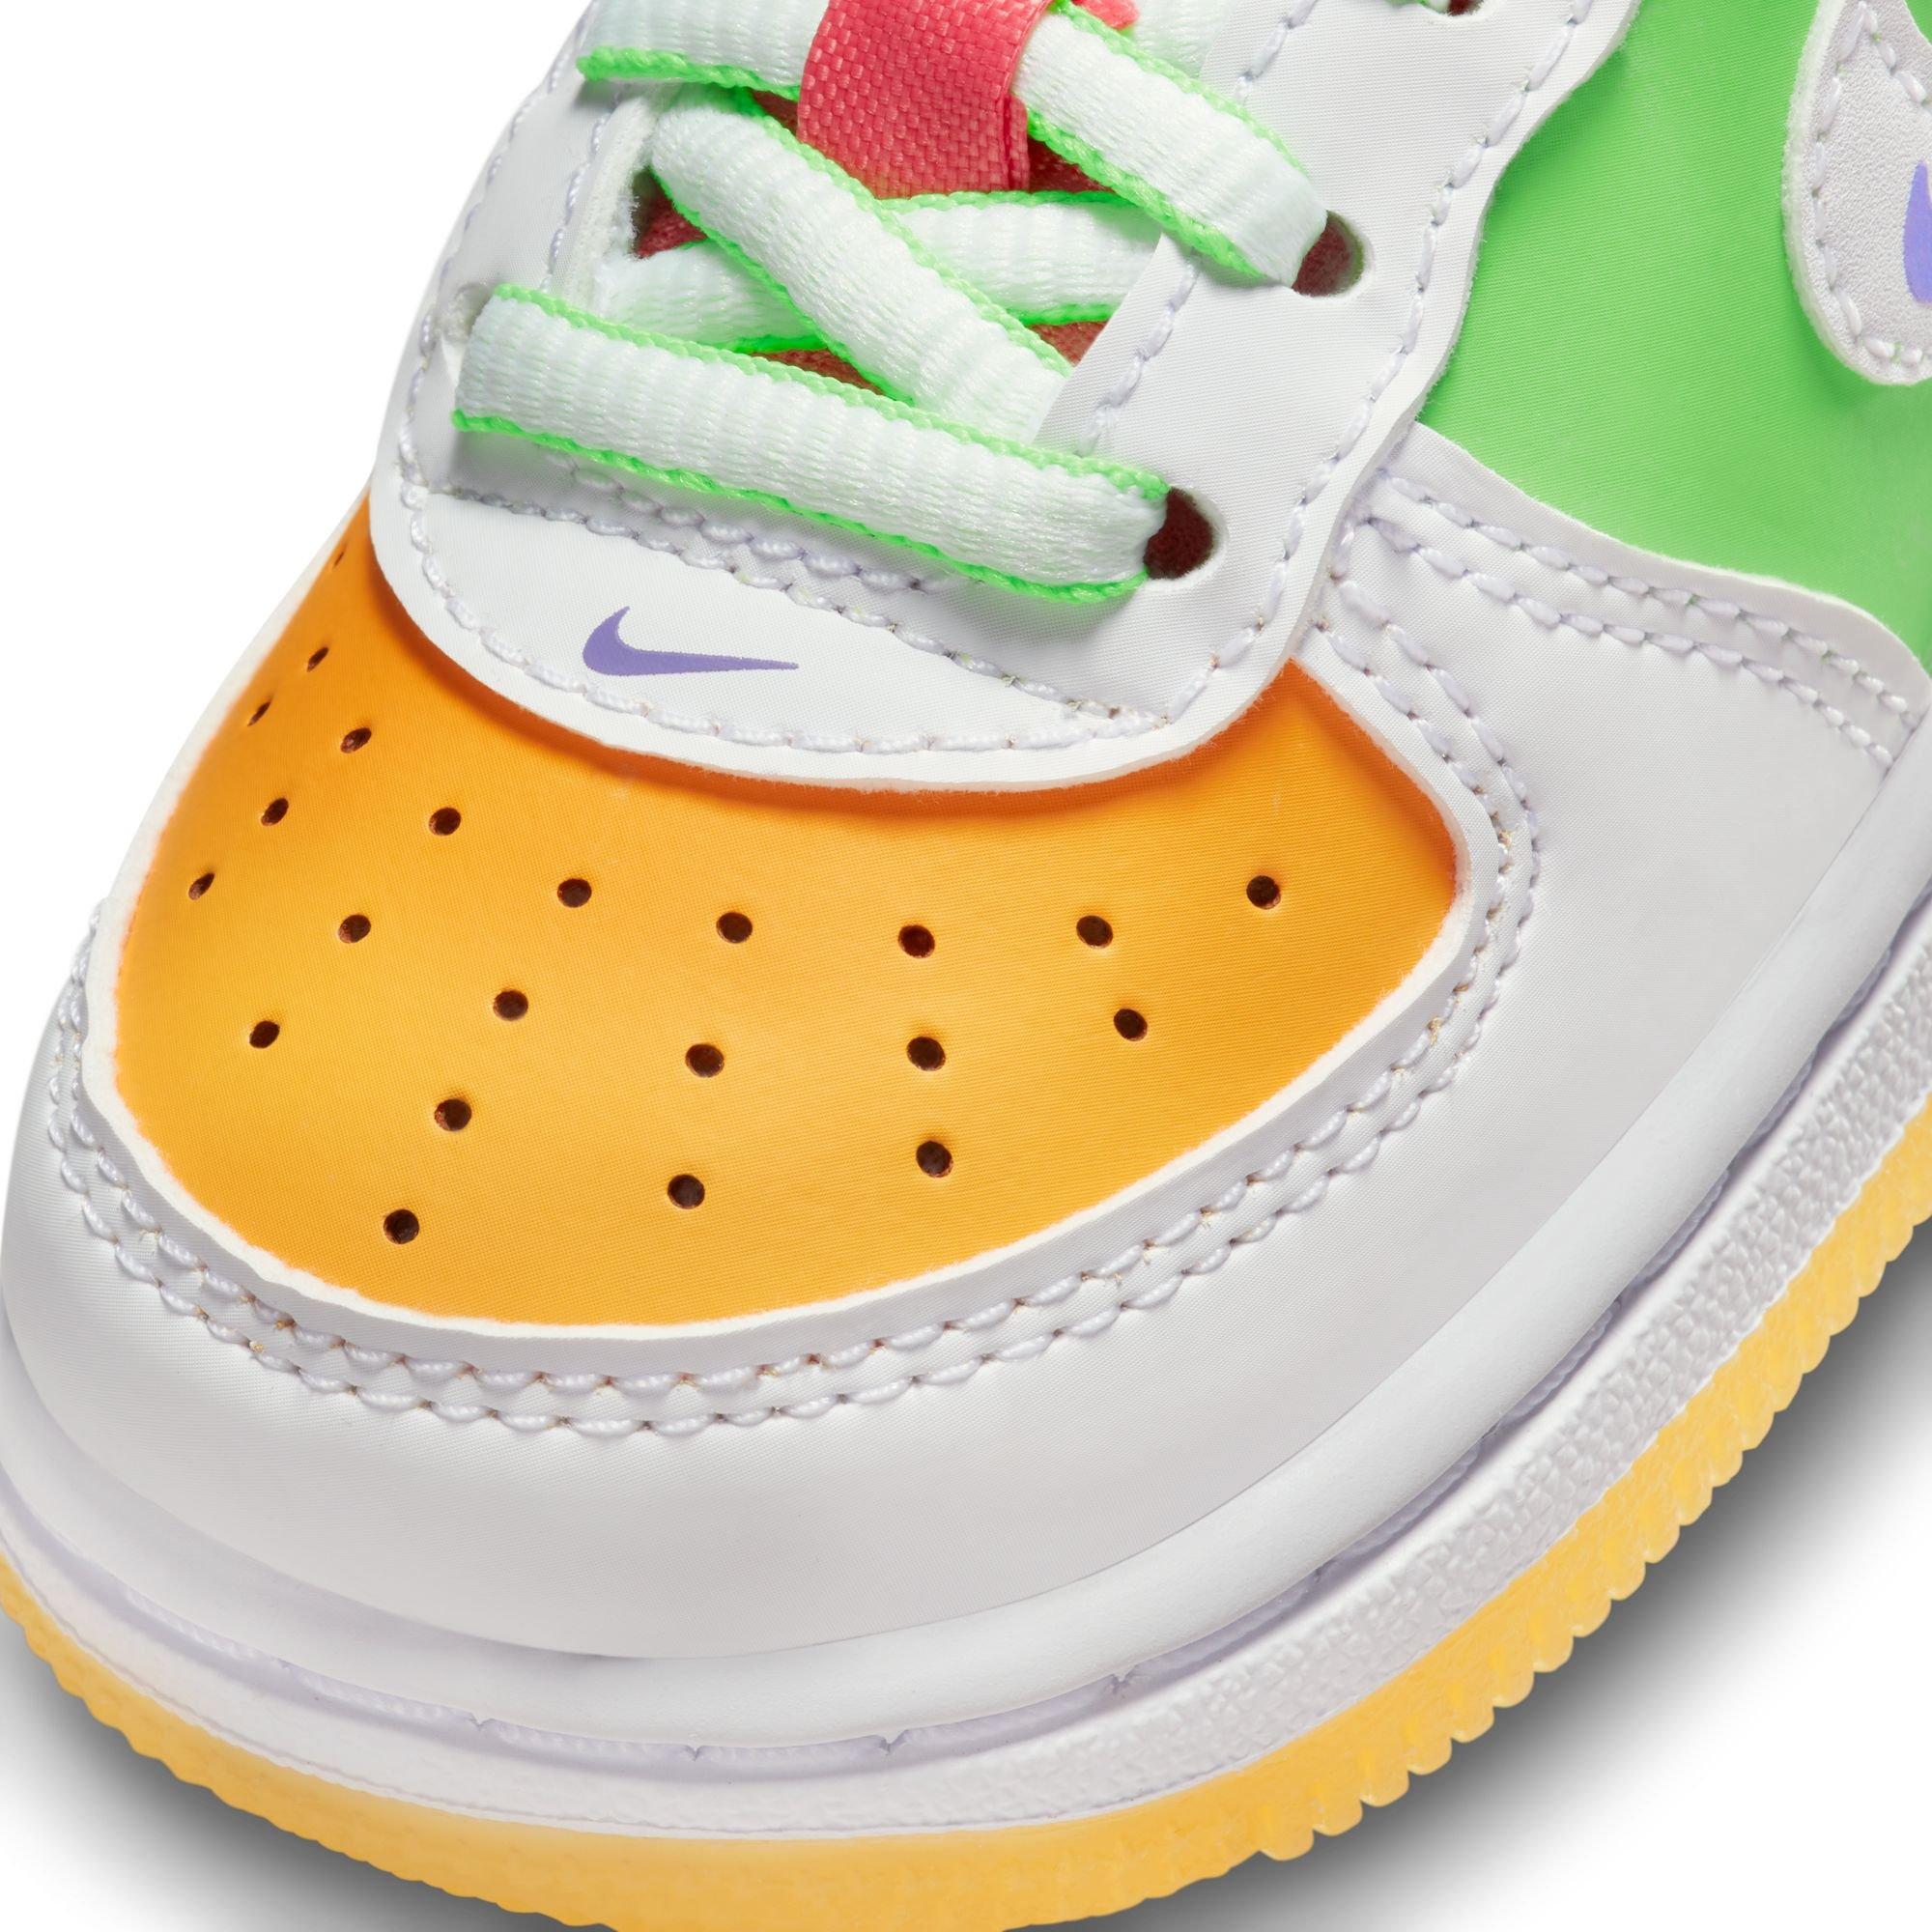 Nike Air Force 1 LV8 White/Space Purple/Sundial Toddler Boys' Shoes, Size: 5